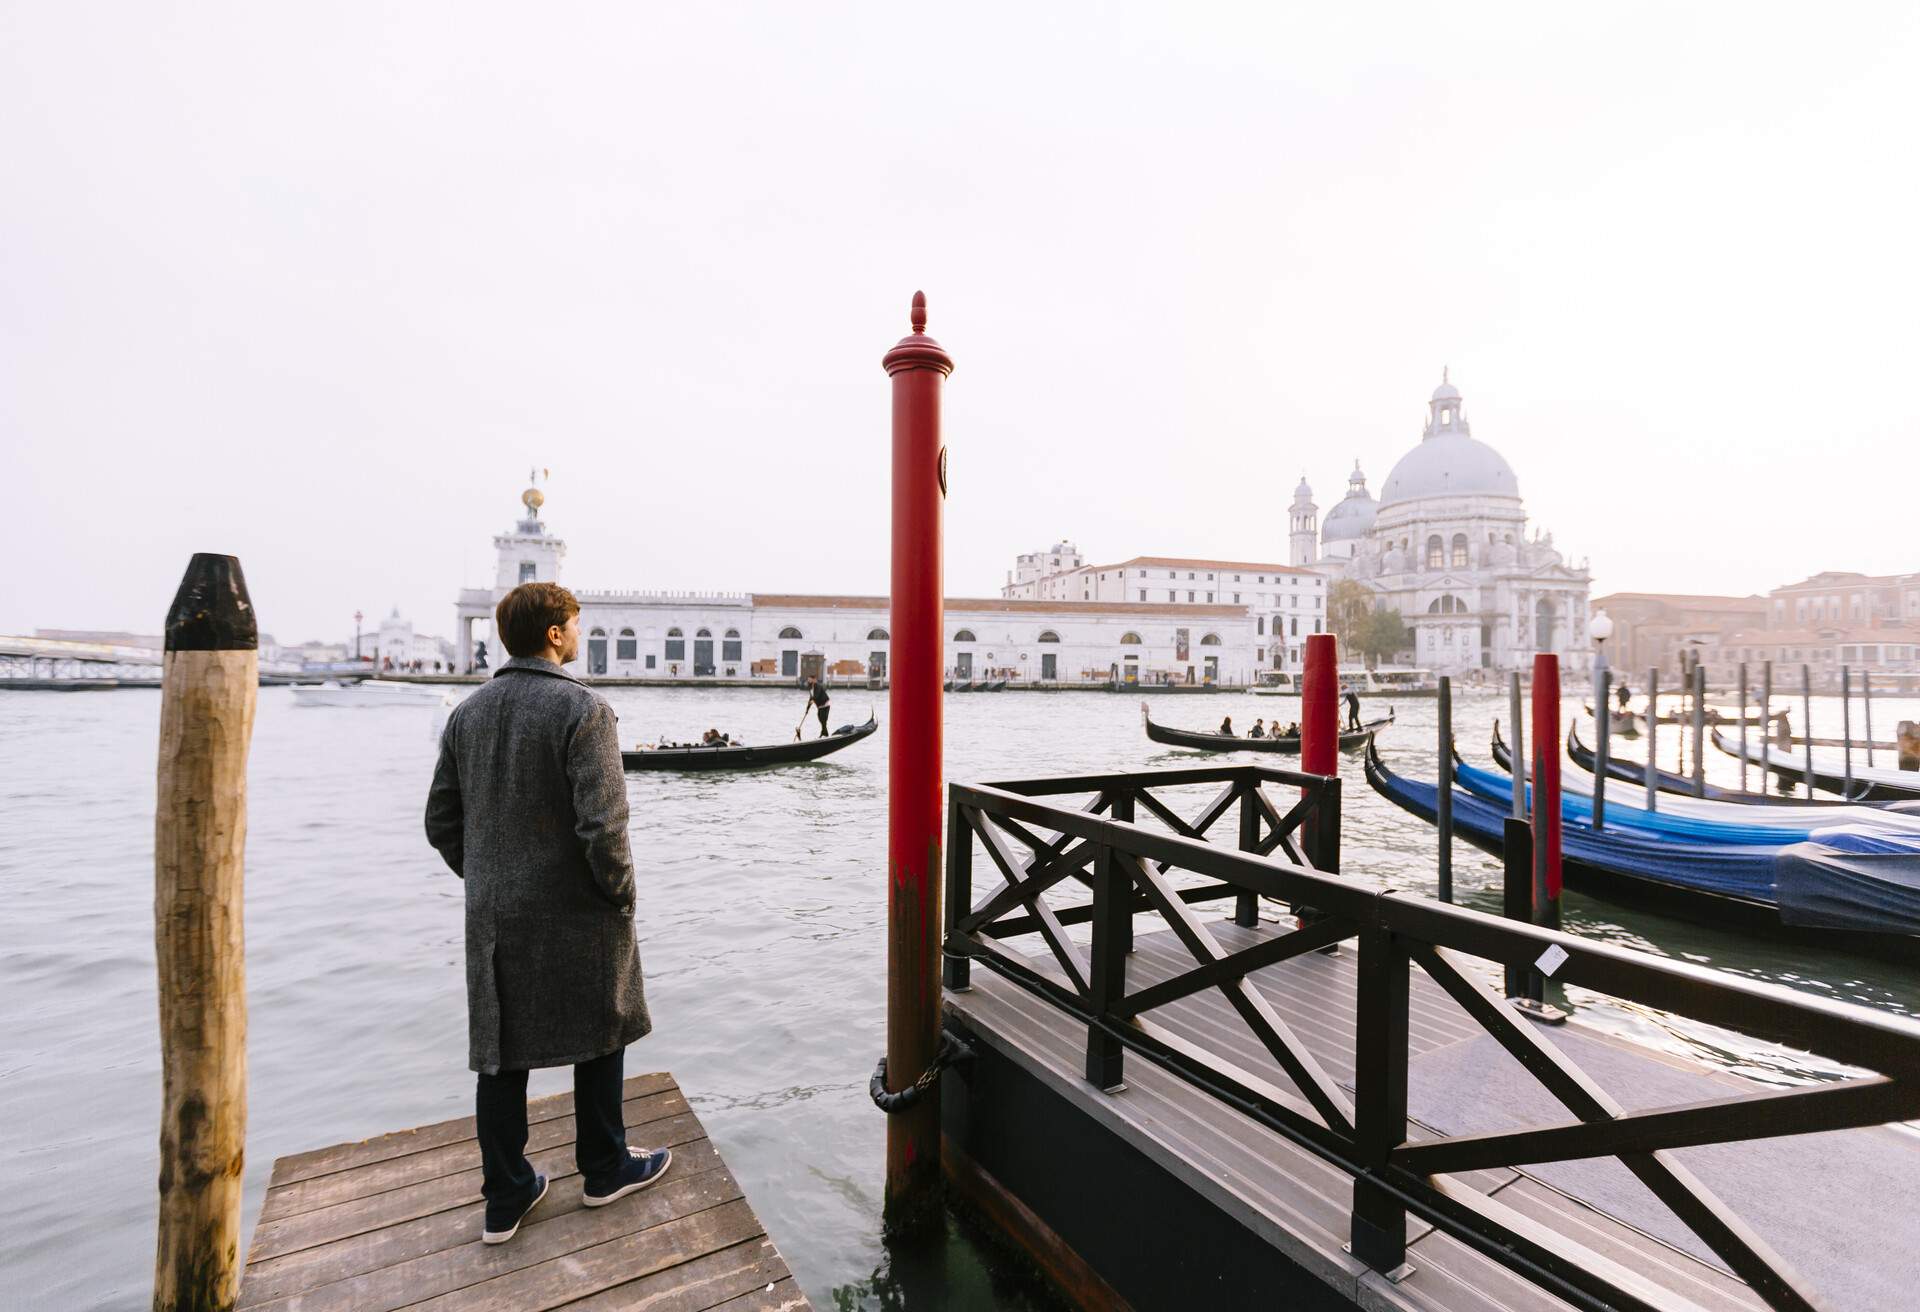 Man overlooking the Venice lagoon on a grey winter day